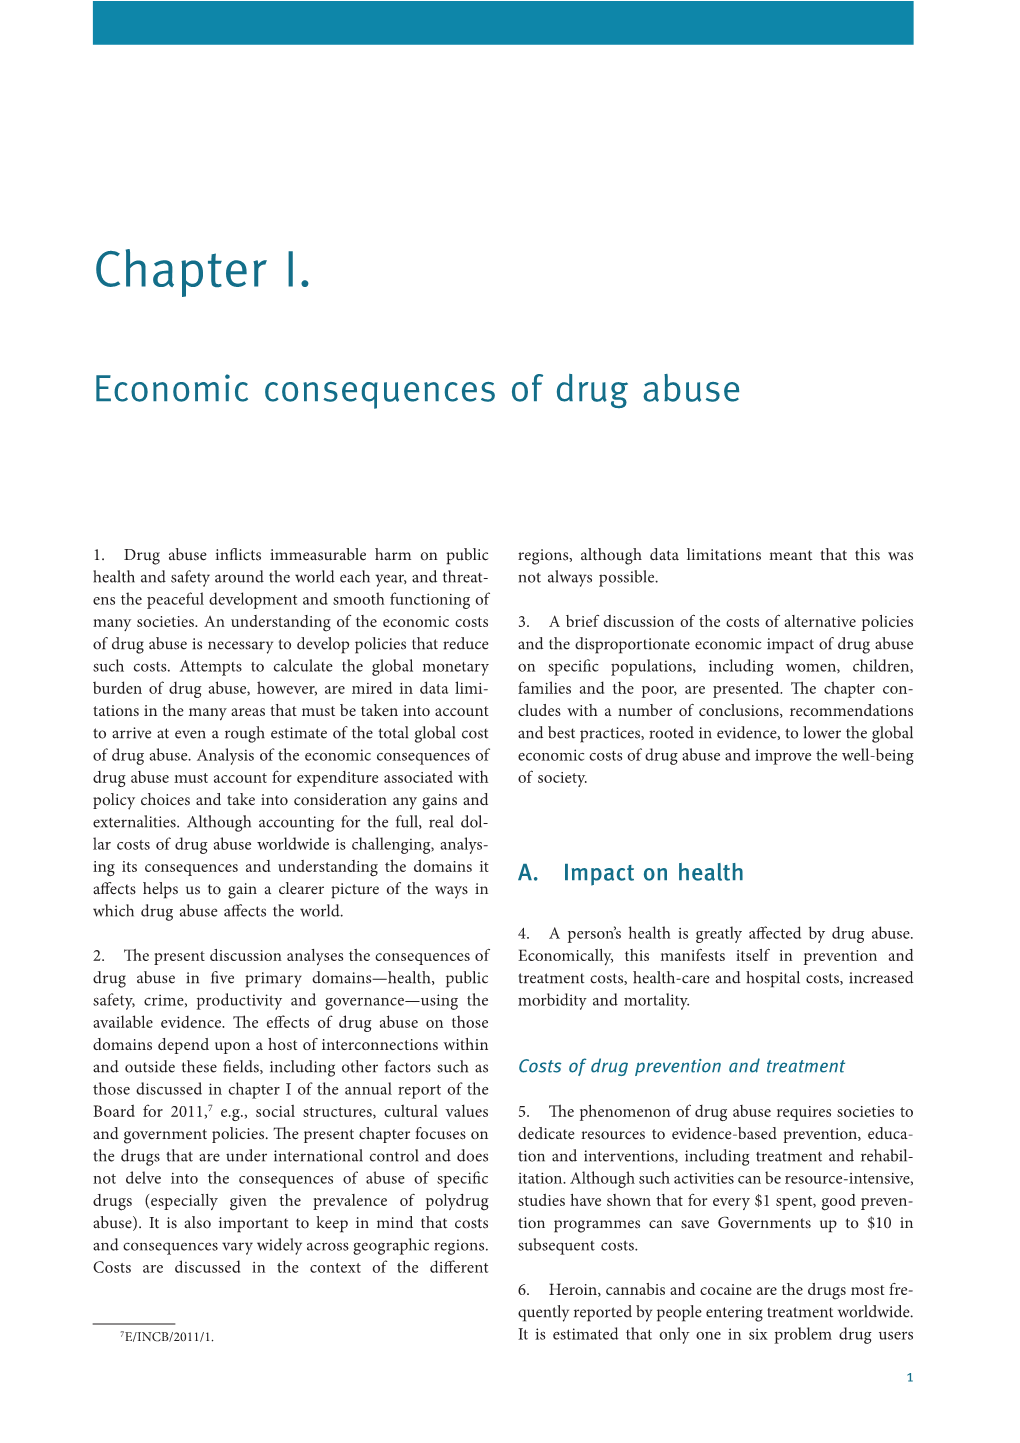 Economic Consequences of Drug Abuse